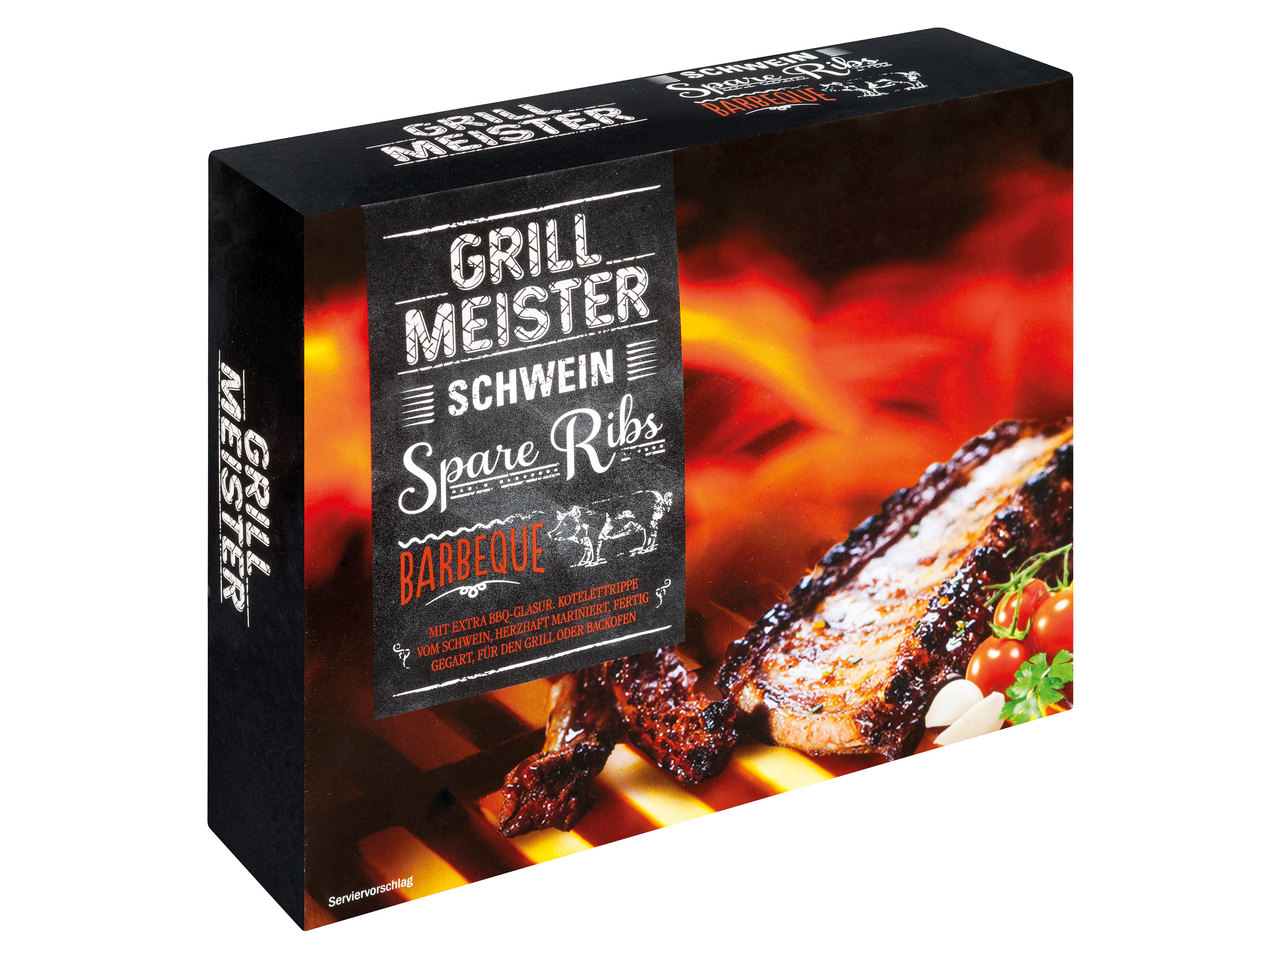 GRILLMEISTER Spare Ribs